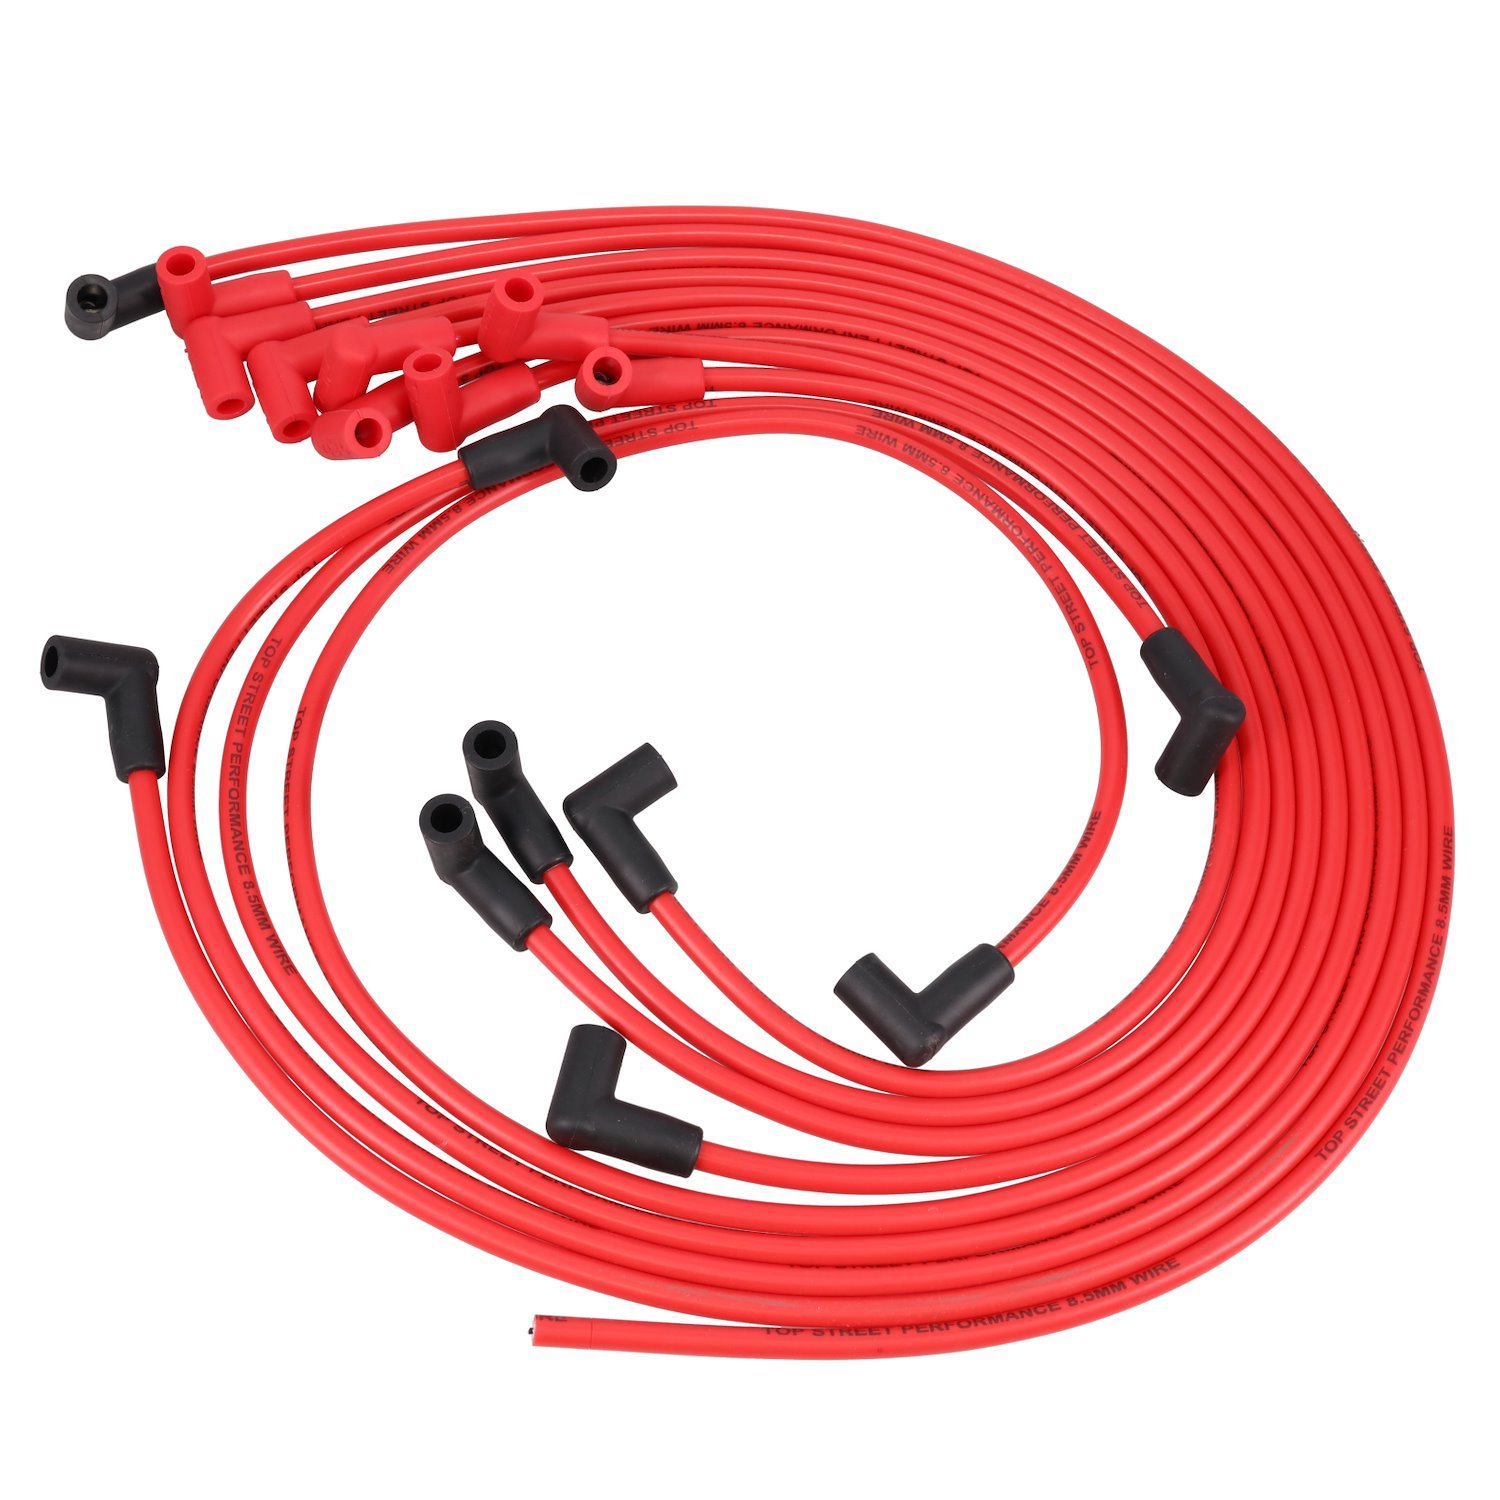 88291 Chevy Small Block Under Header Wires, 8.5mm Red, 90-Degrees Plug Boots